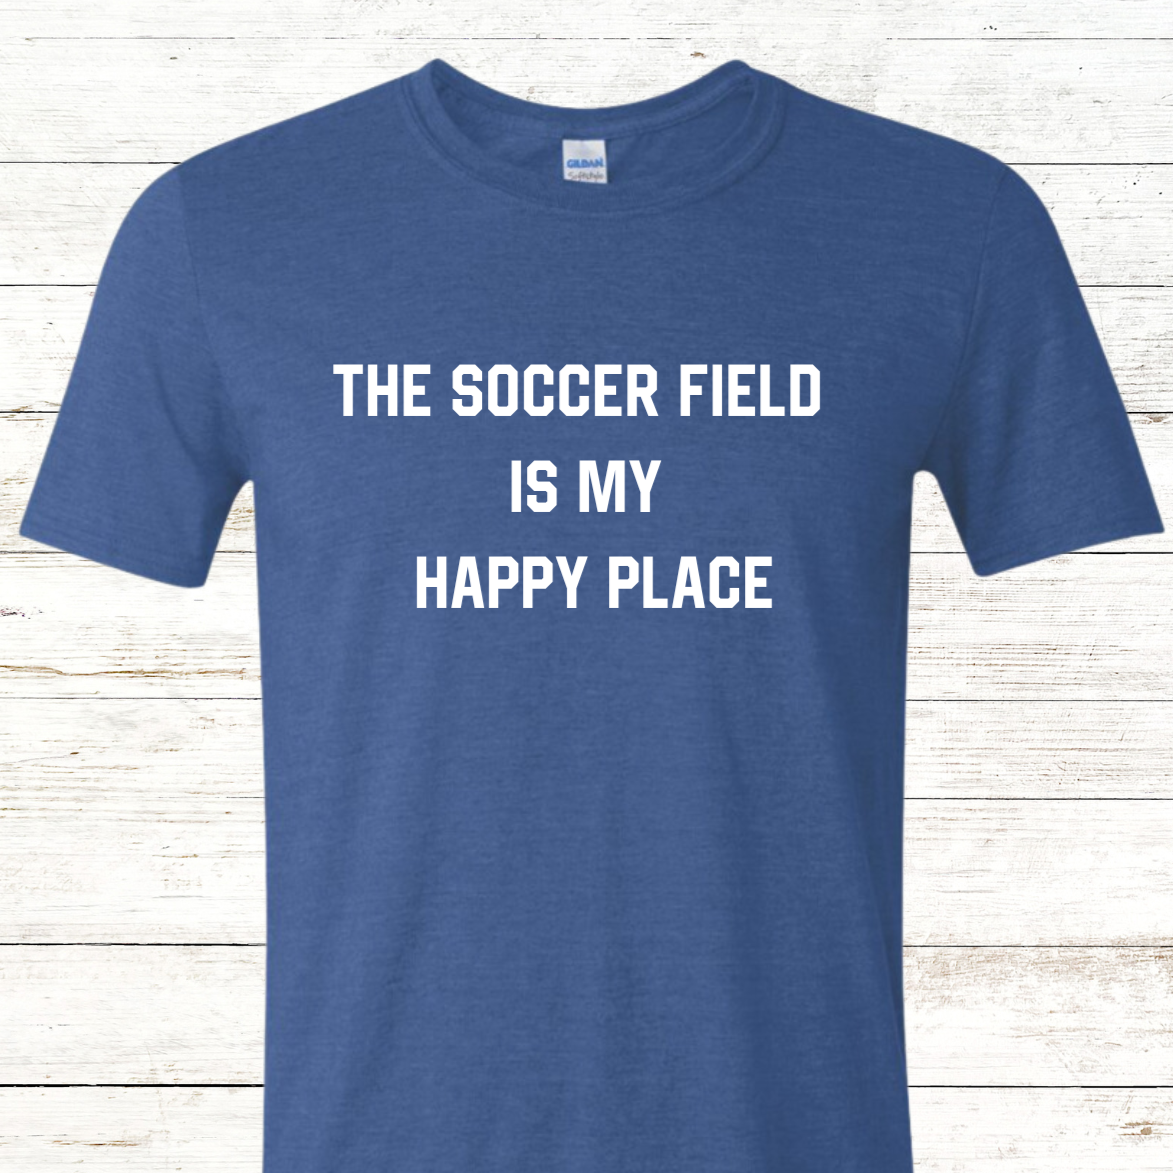 The Soccer Field is my happy place: Adult Crewneck with Back Personalization Option